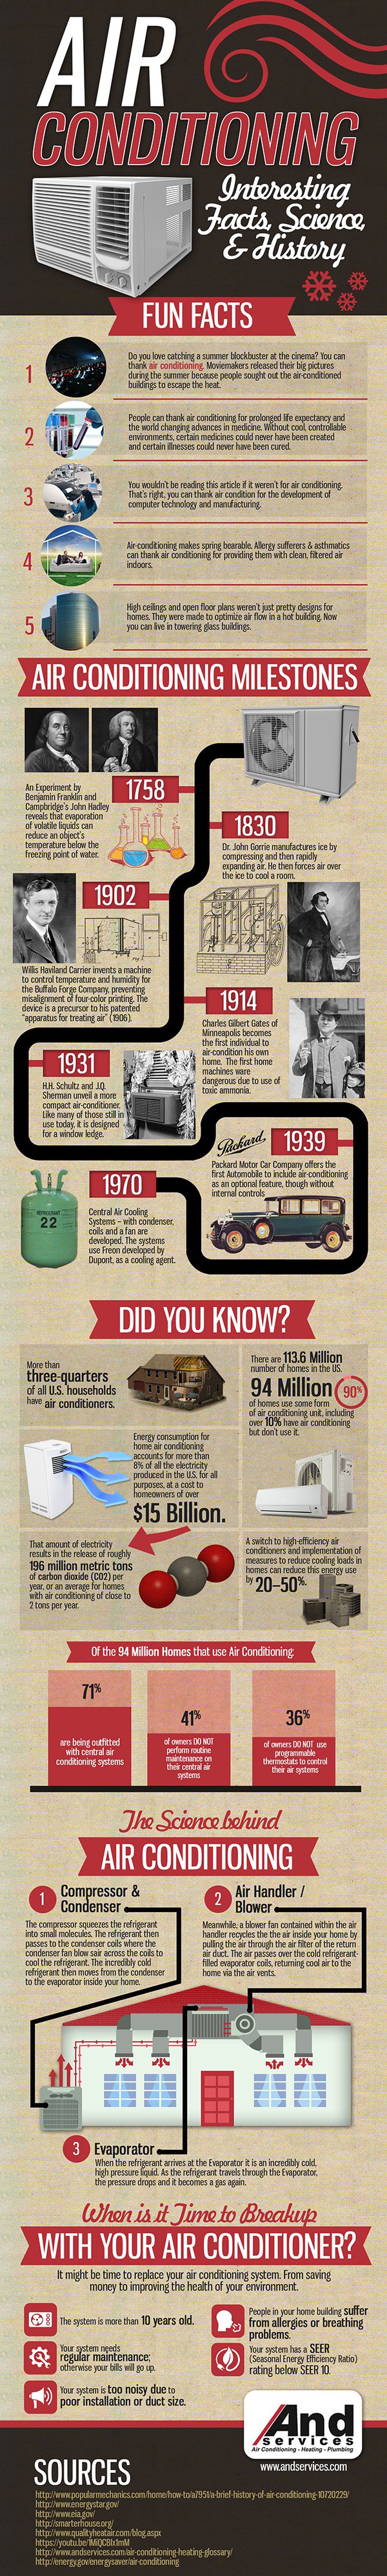 Air Conditioning Fun Facts, Science & History